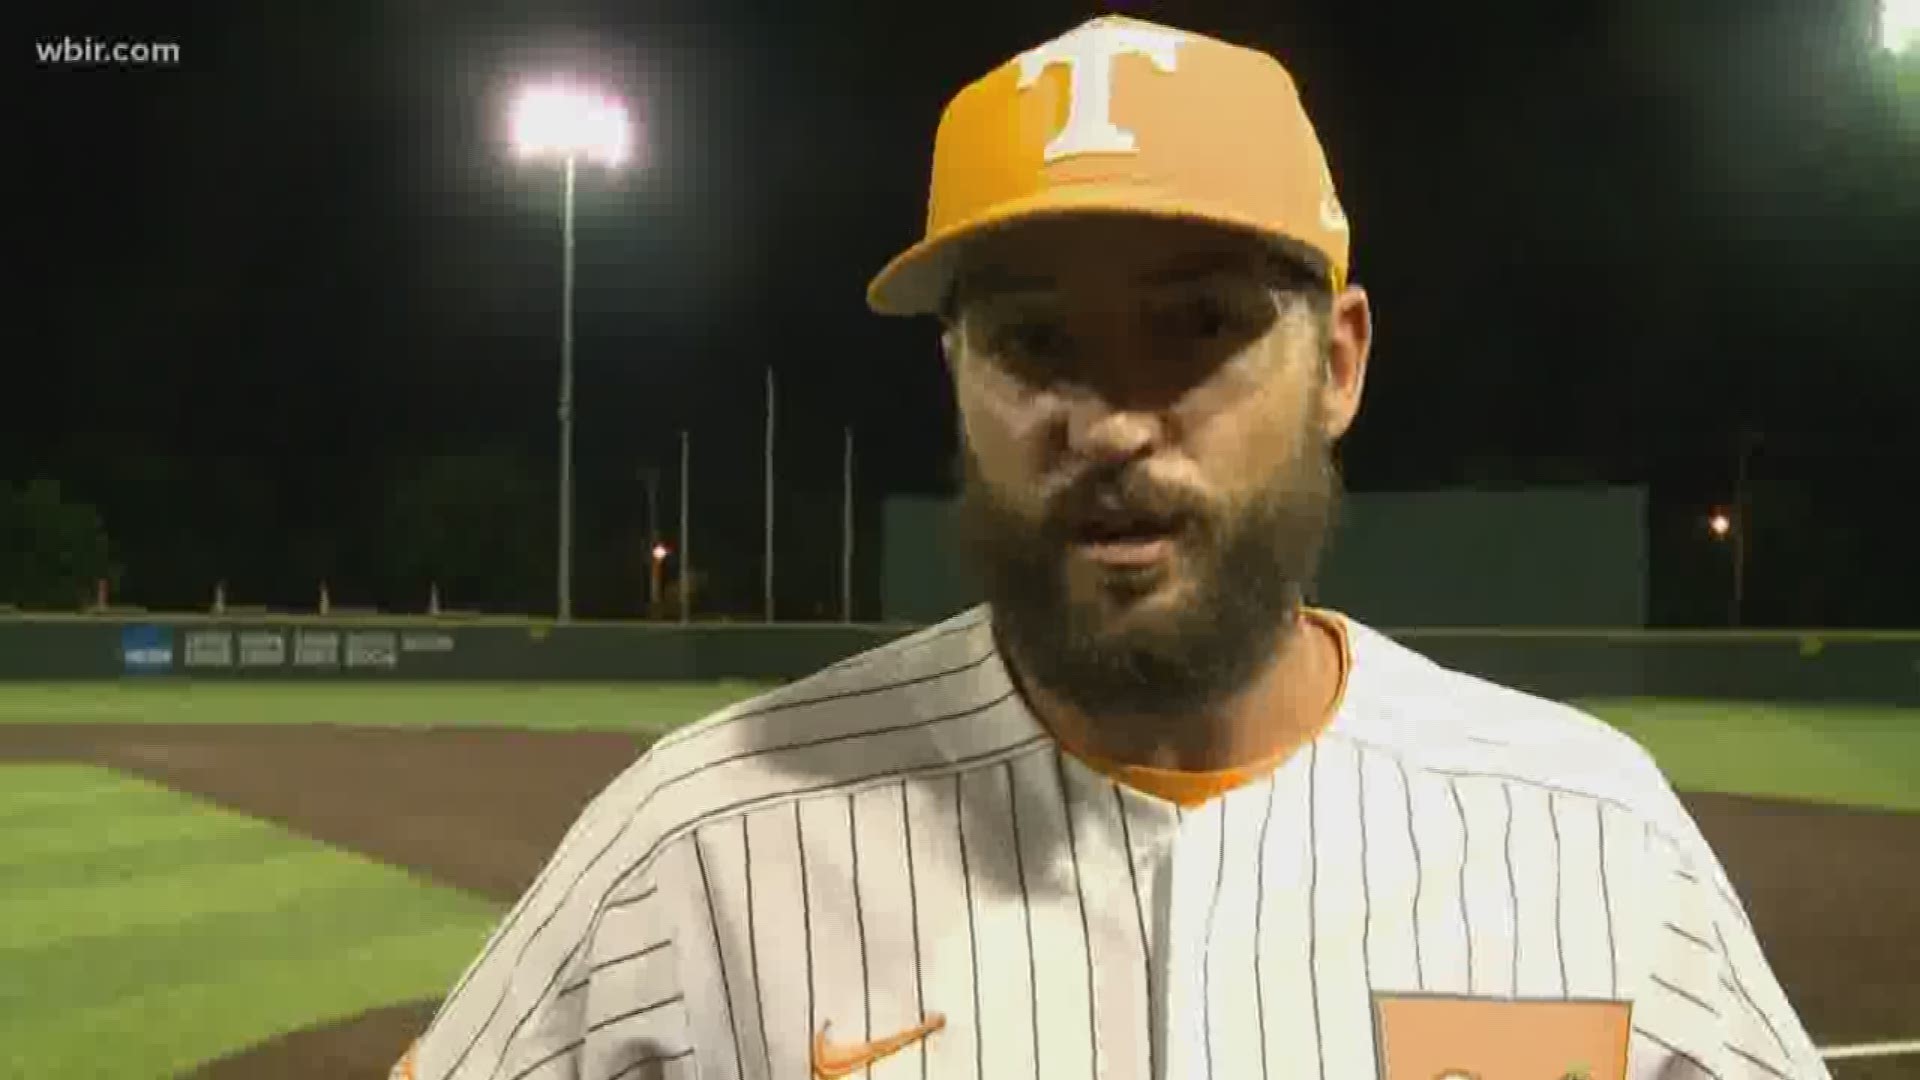 A big sixth inning helps lift Tennessee over Missouri.